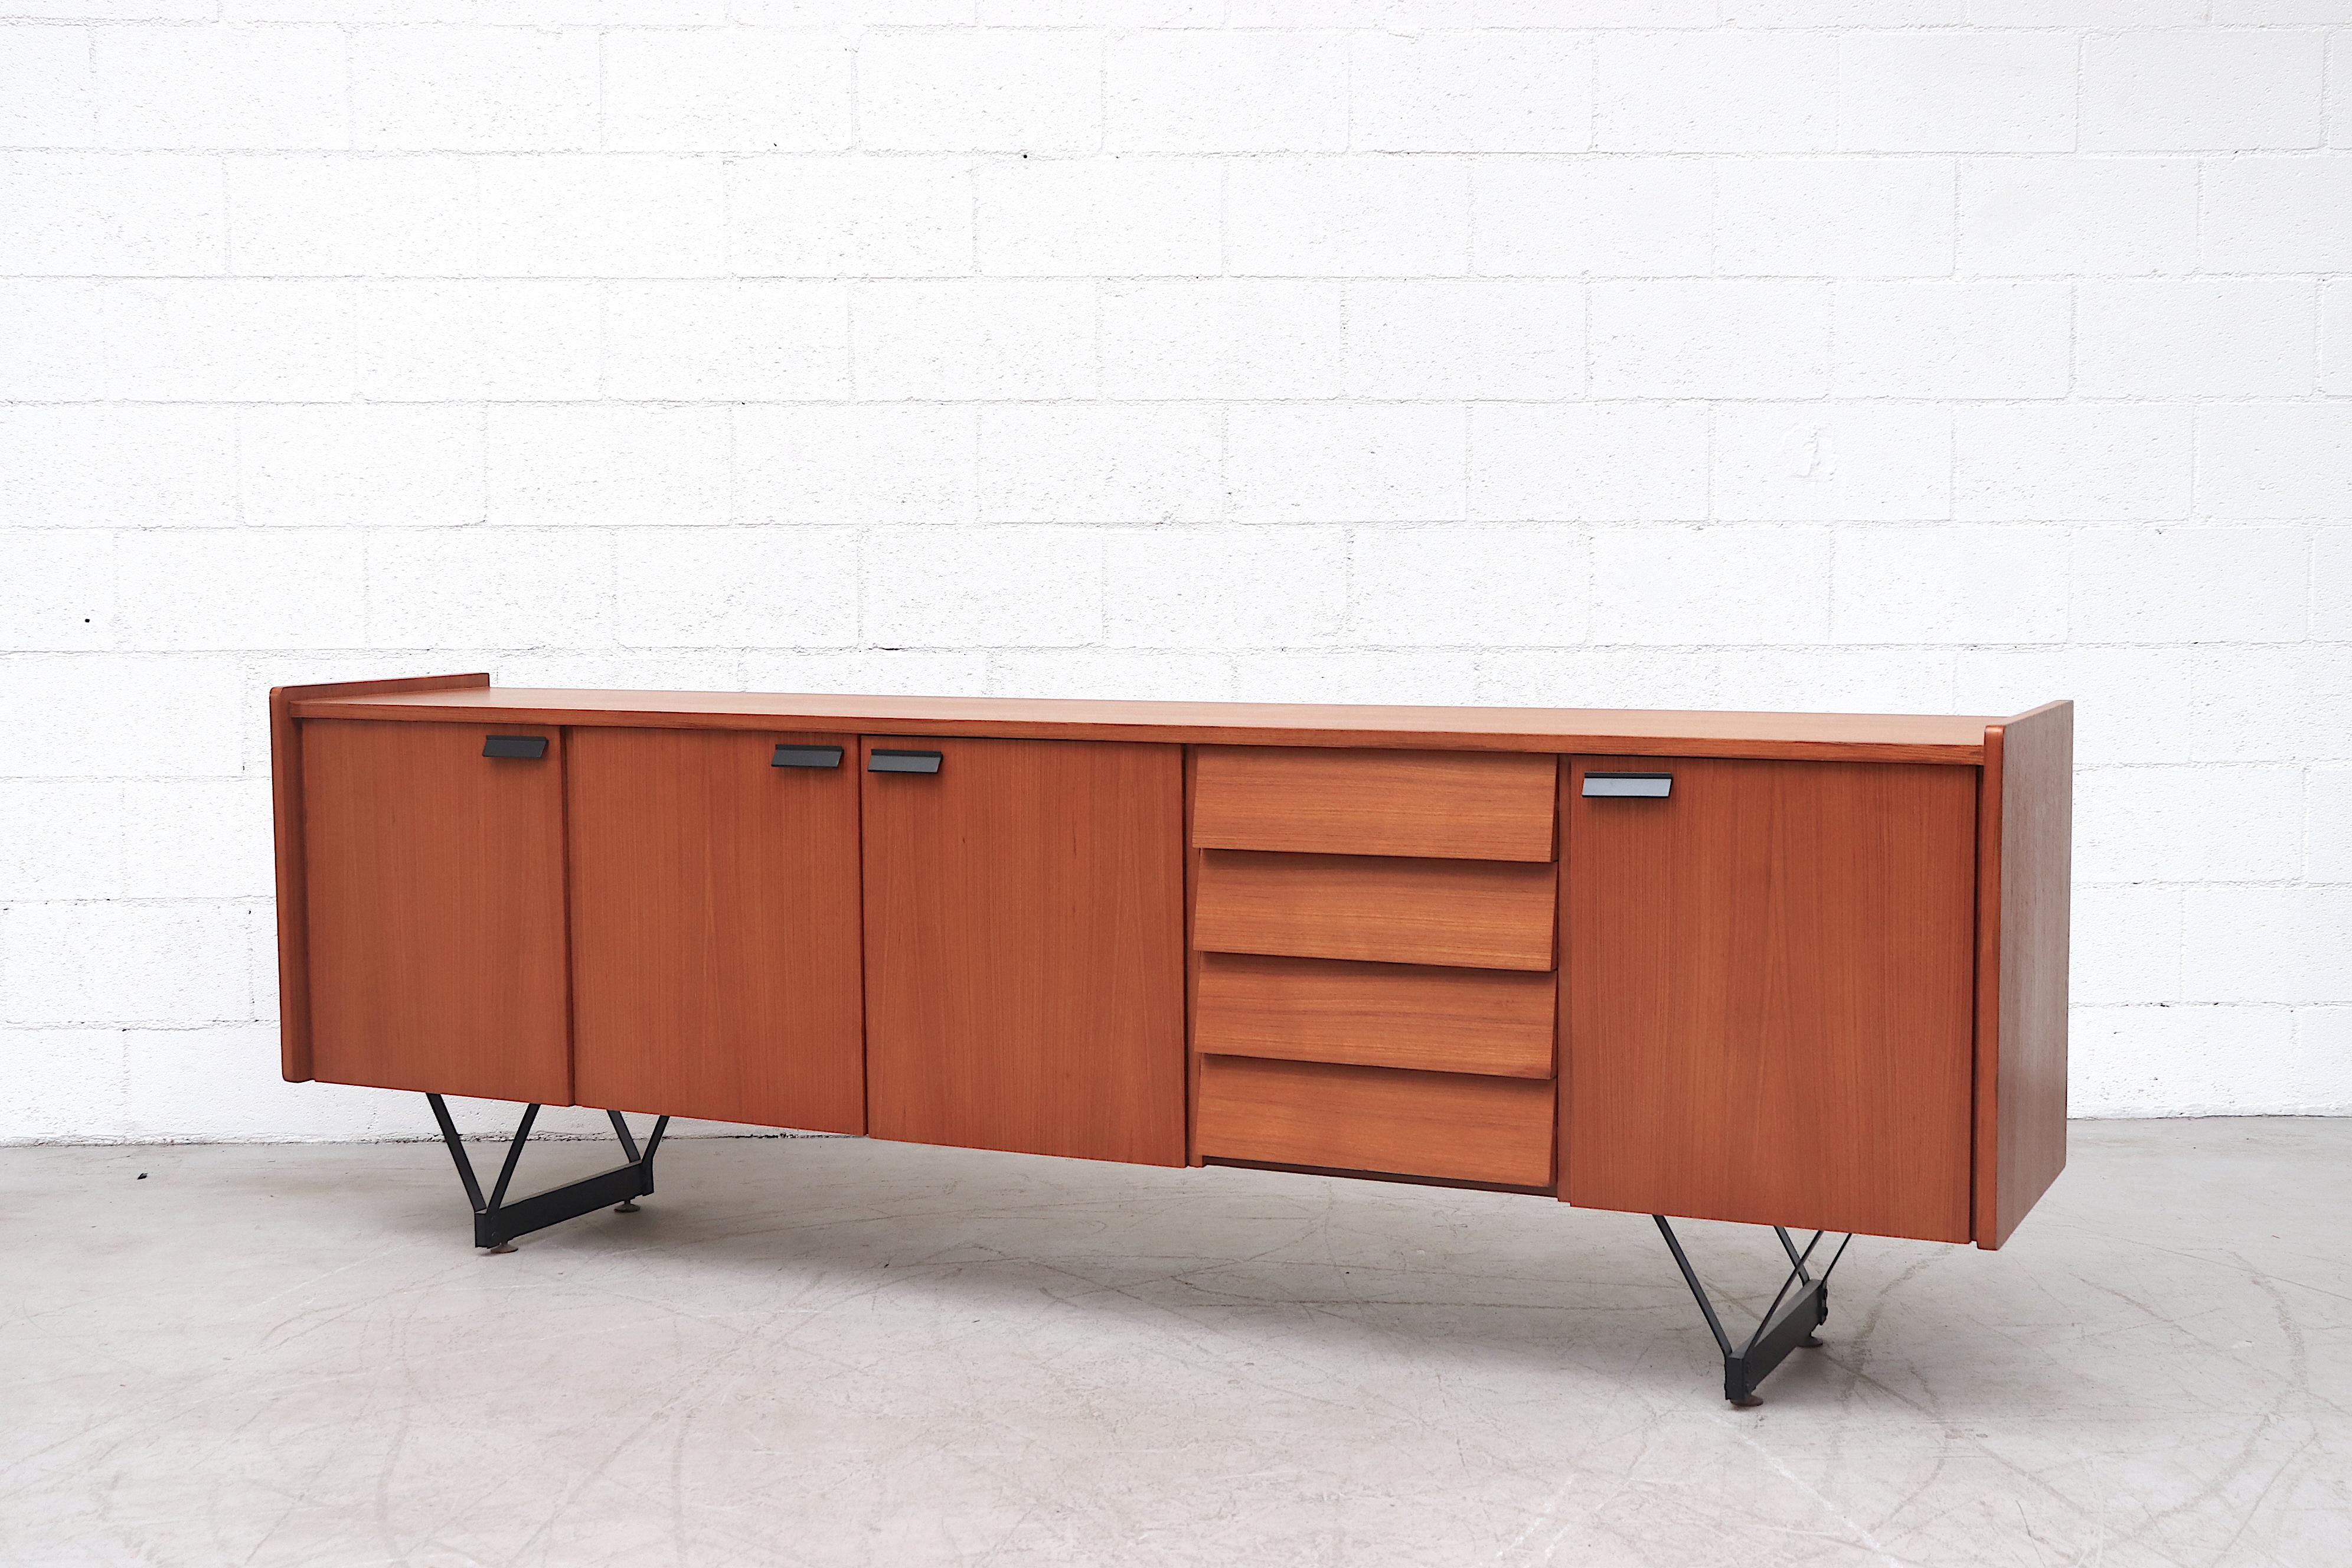 Beautiful Mid-Century Italian teak credenza with black enameled architectural legs with cantilevered drawers and large storage cabinets. Handsome black enameled metal handles. Lightly refinished. In good condition with some wear consistent with use